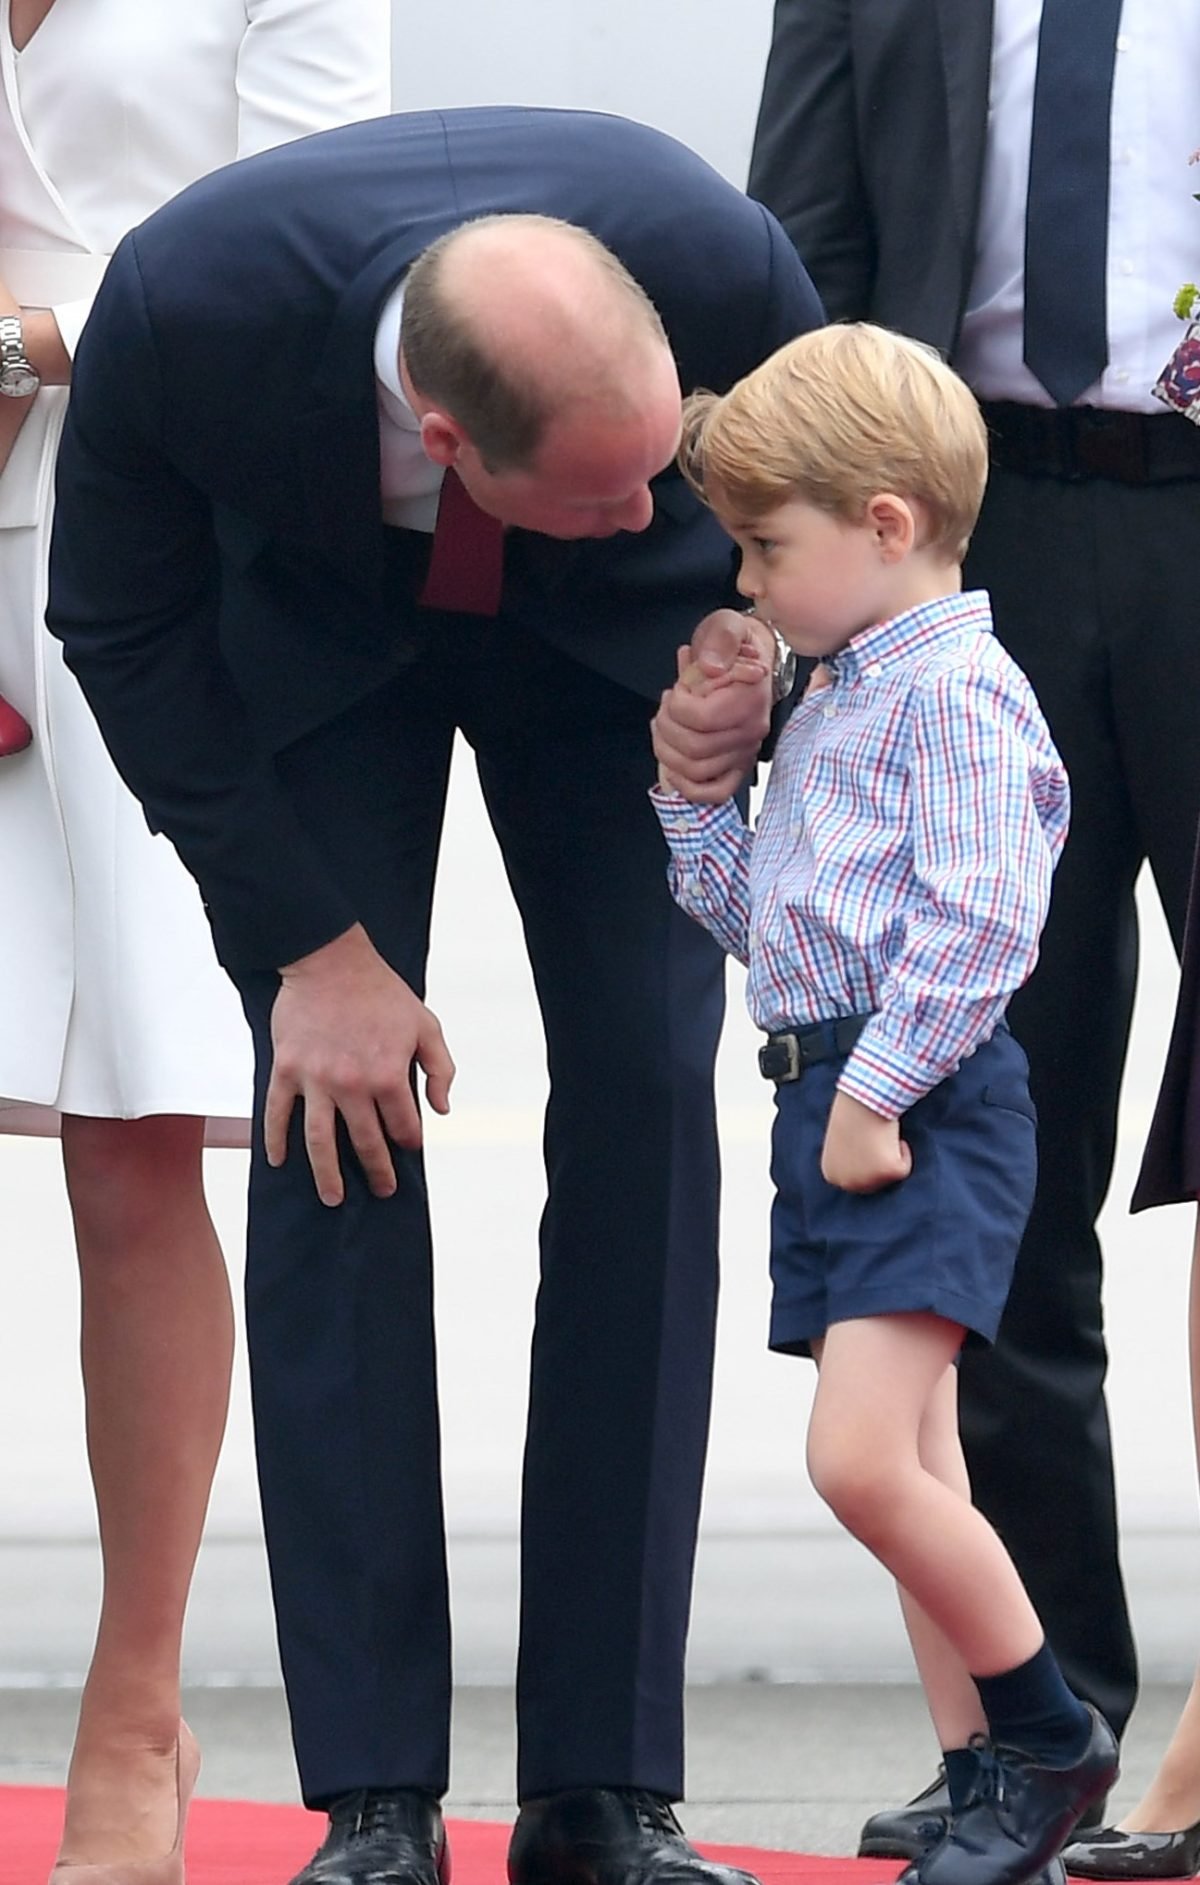 Prince William bending down to talk to his son Prince George when they arrive at Warsaw airport for Royal Tour of Poland and Germany